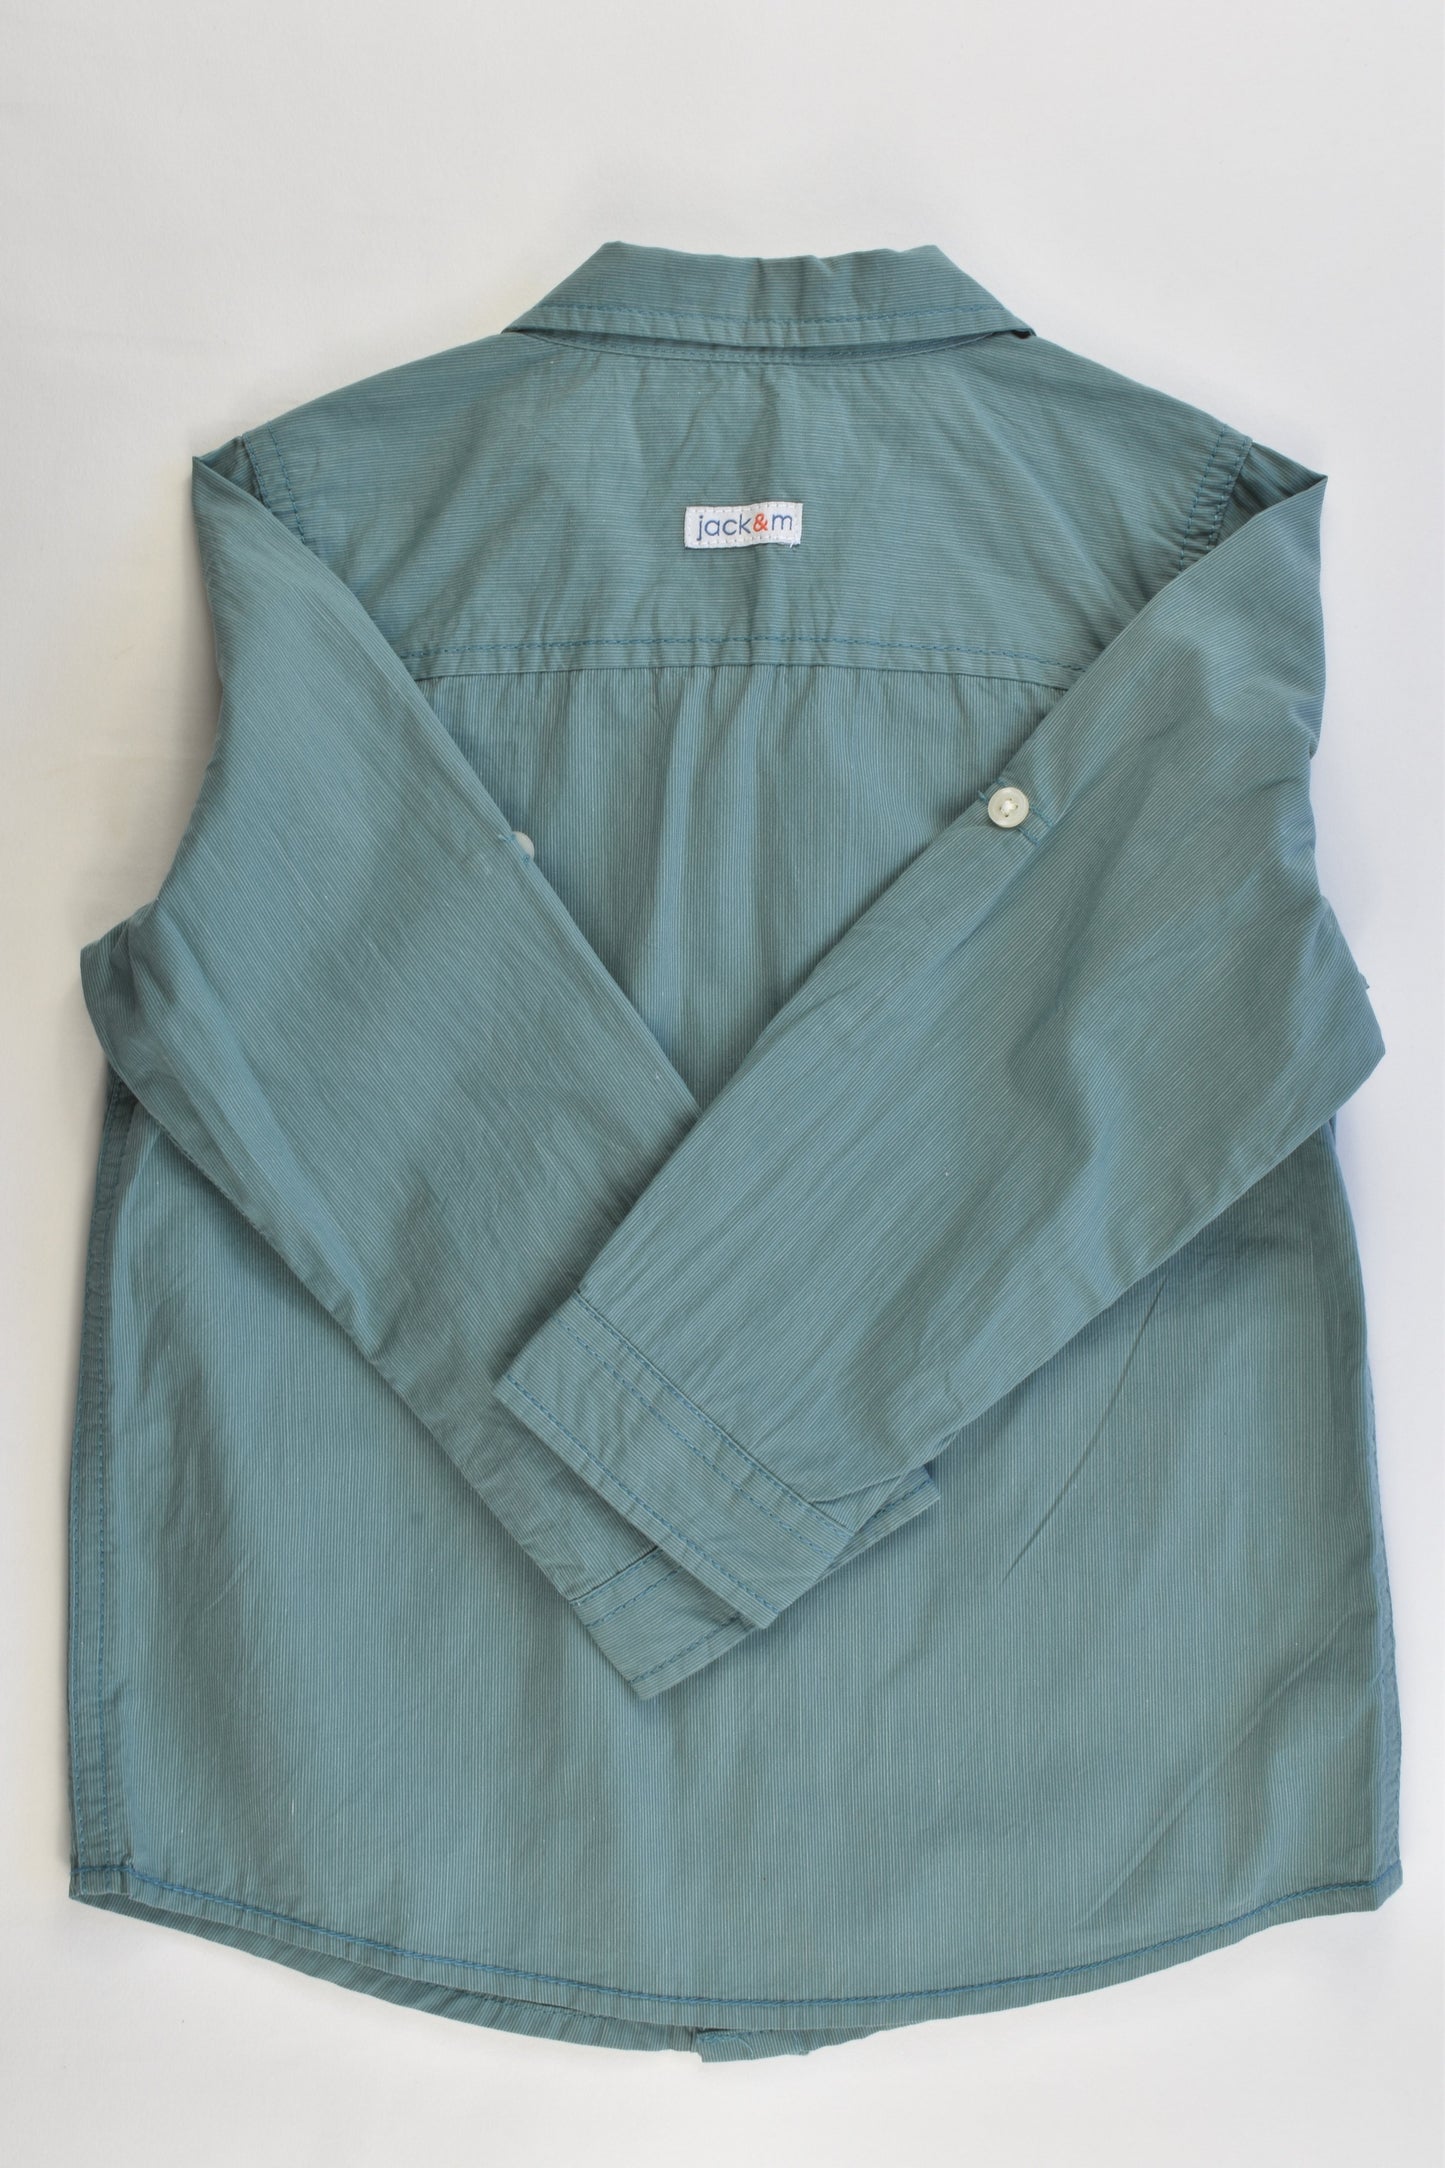 Jack & Milly Size 3 Collared Shirt